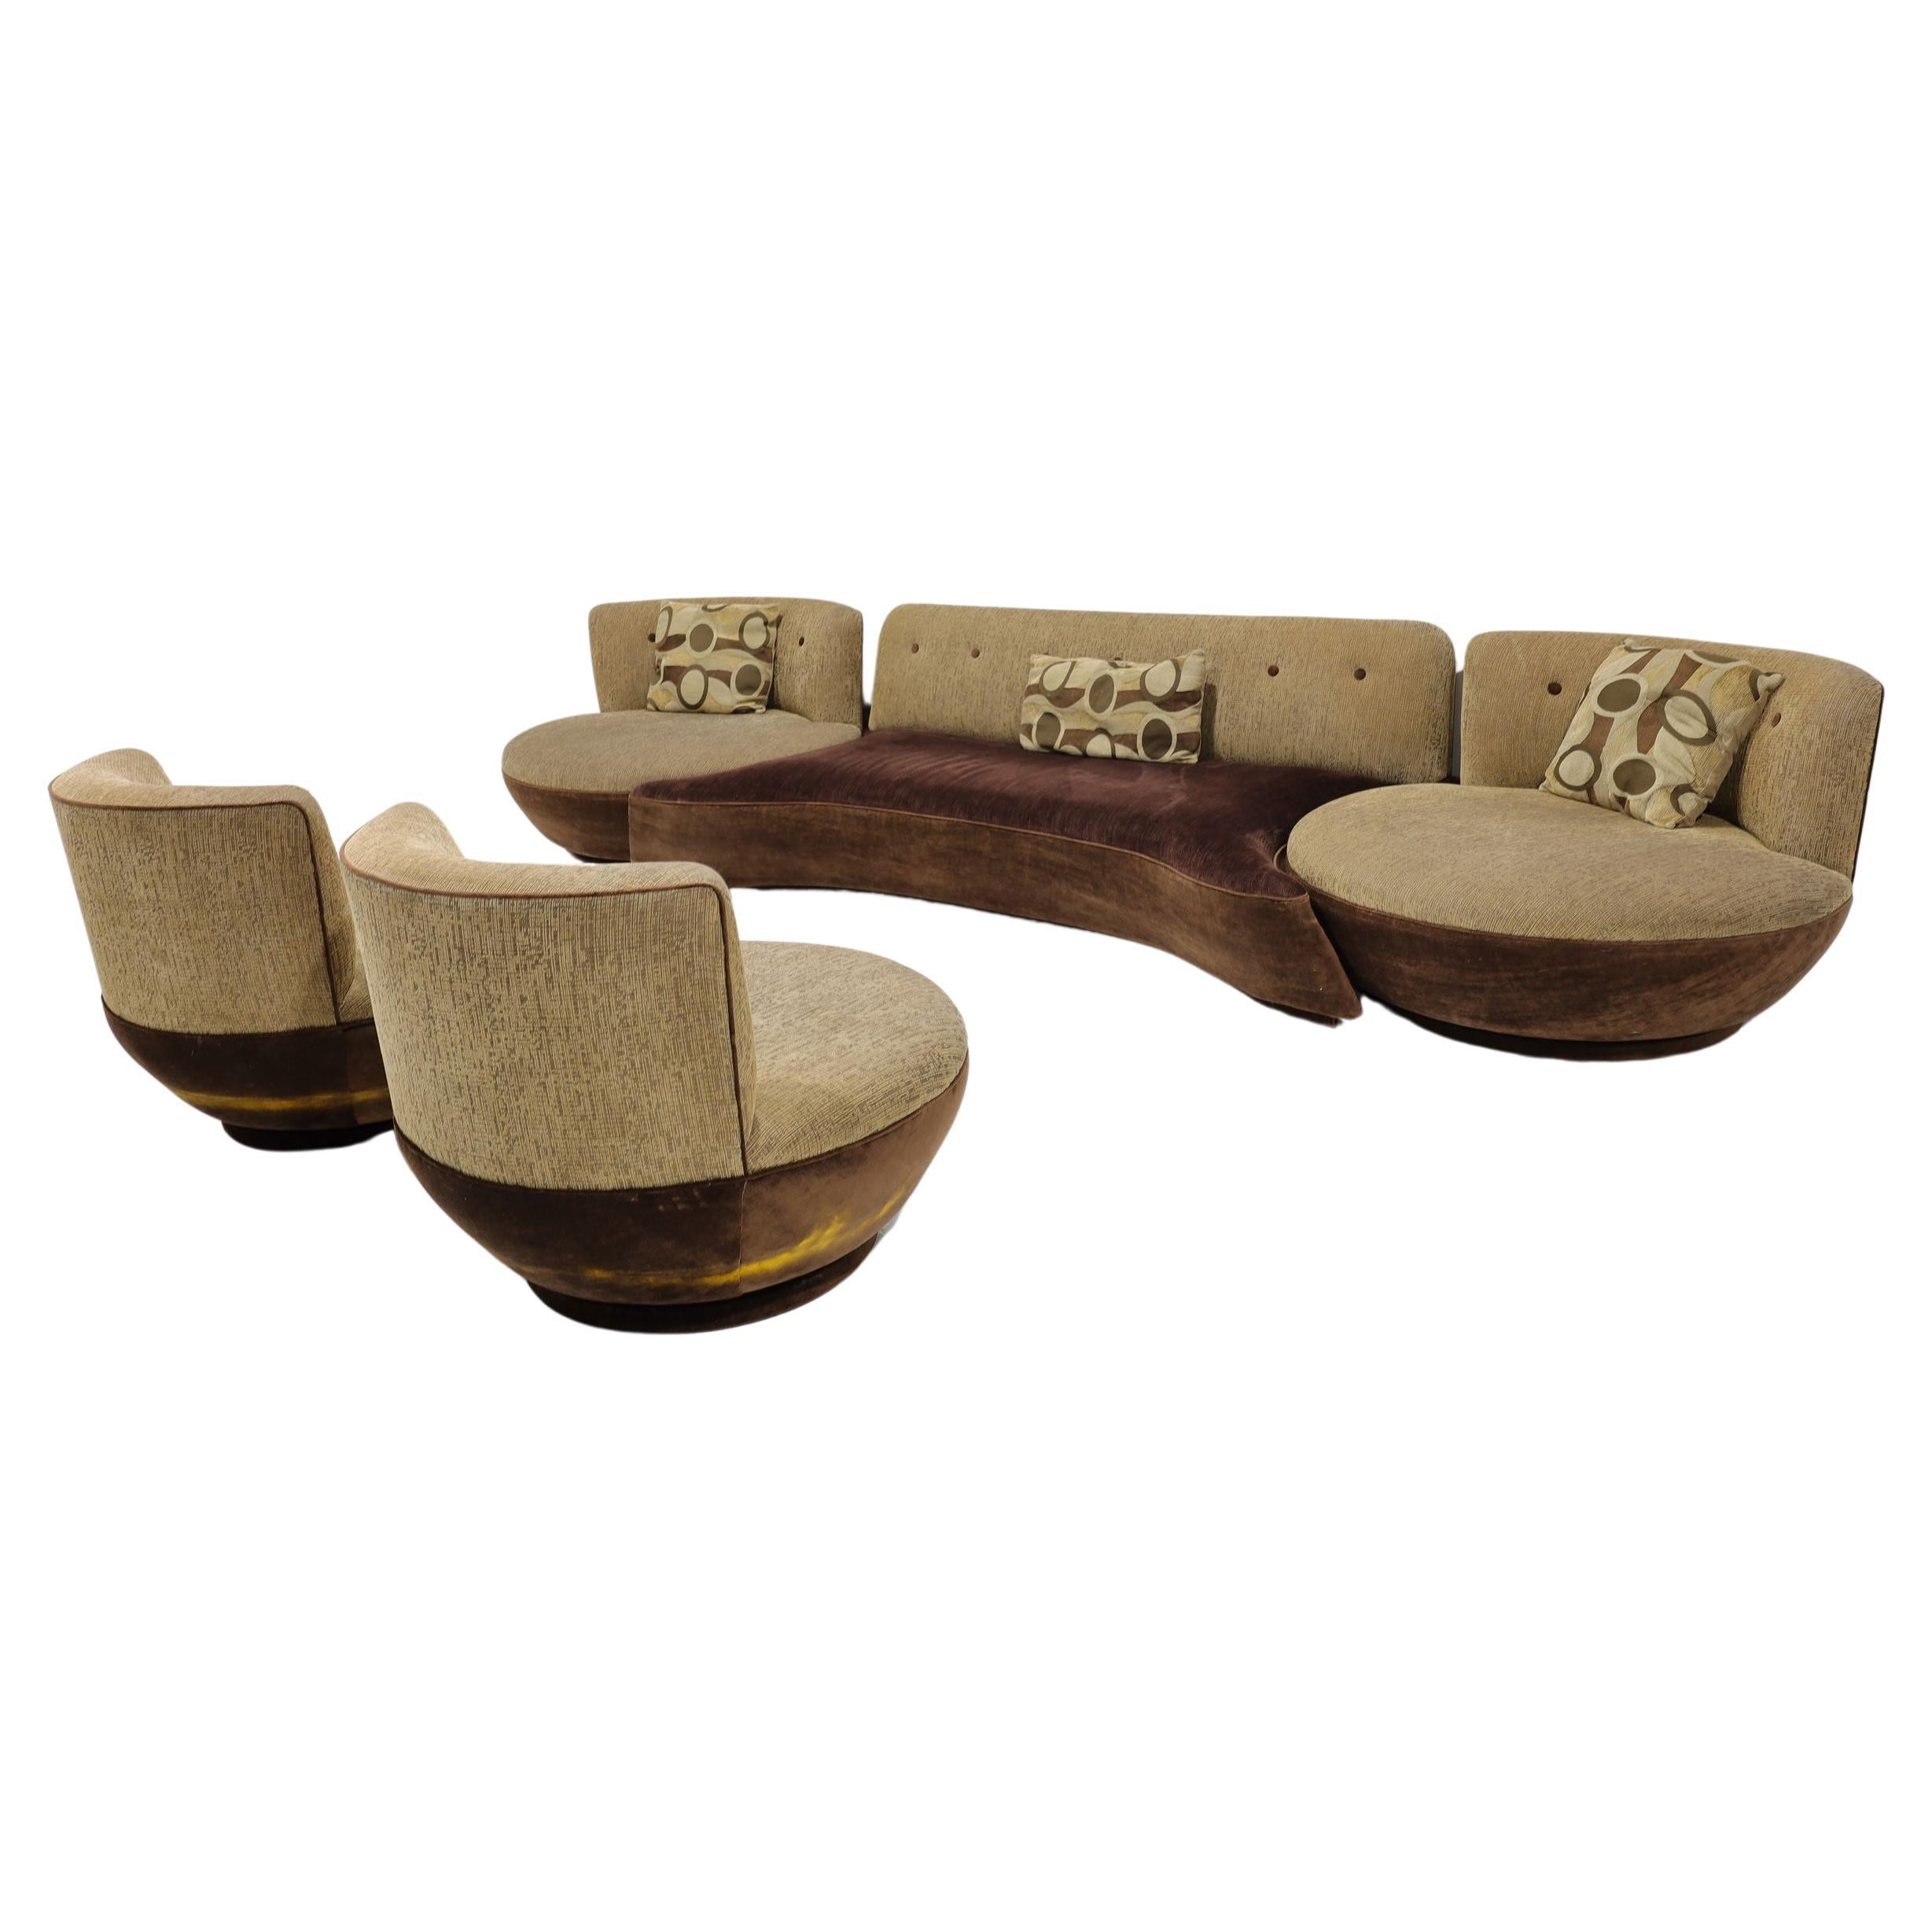 Milo Baughman for Thayer Coggin Sectional Sofa and Matching Swivel Chairs